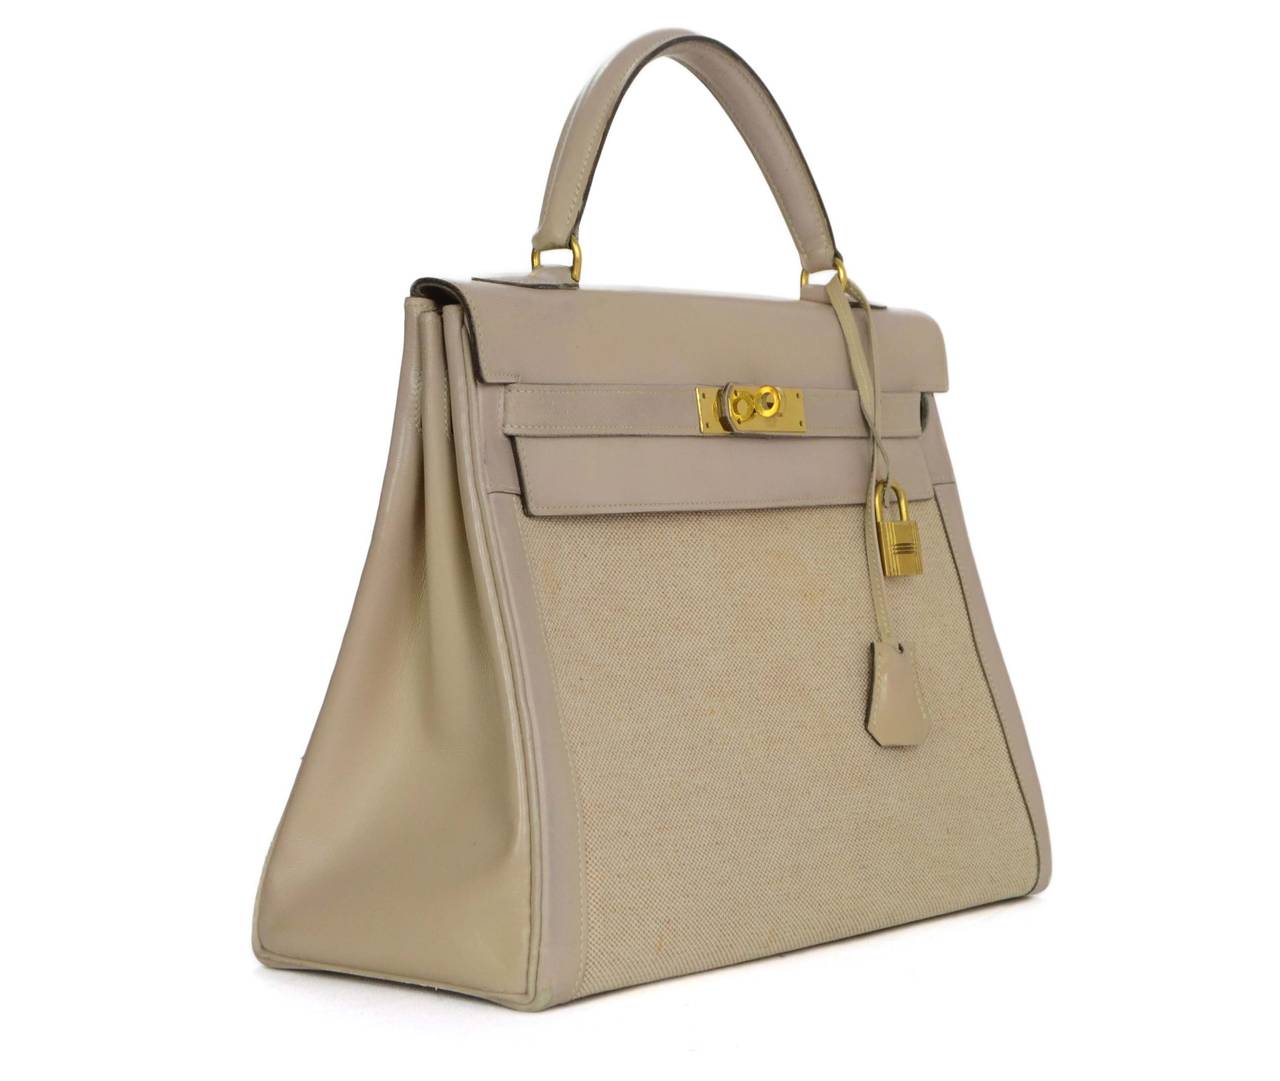 Hermes Vintage '56 Beige Toile 32cm Kelly Bag 
Features leather trim and flap top with toile canvas as the main panels of bag
Made In: France
Year of Production: 1956
Color: Beige
Hardware: Goldtone
Materials: Leather and toile canvas
Lining: